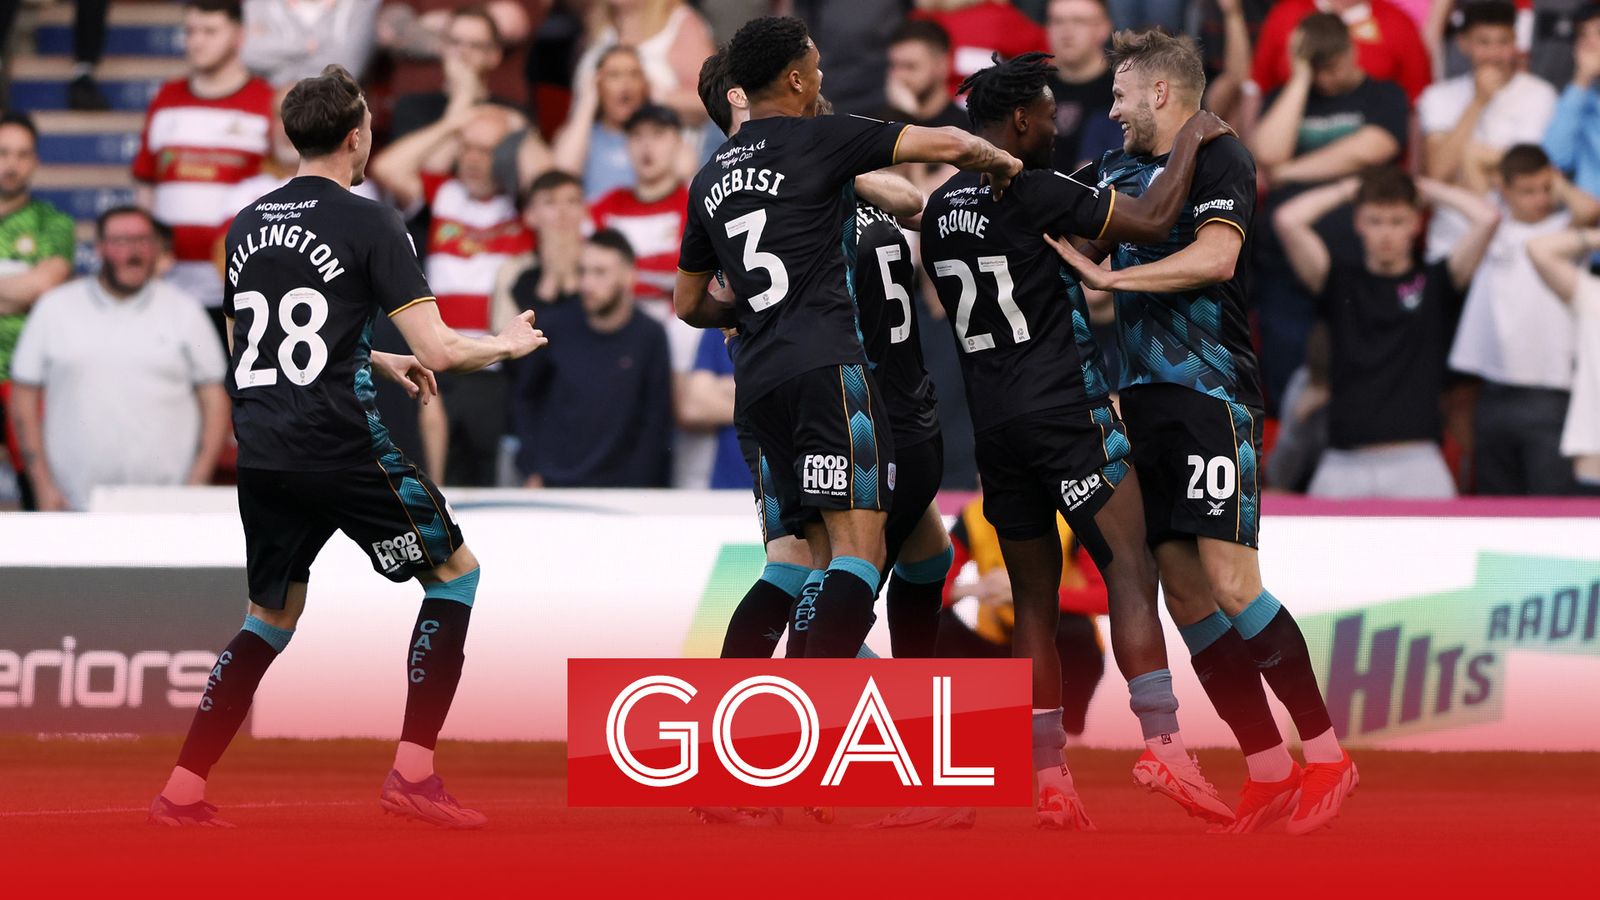 'Doncaster's lead has evaporated!' | Crewe go level on aggregate after 16 mins!